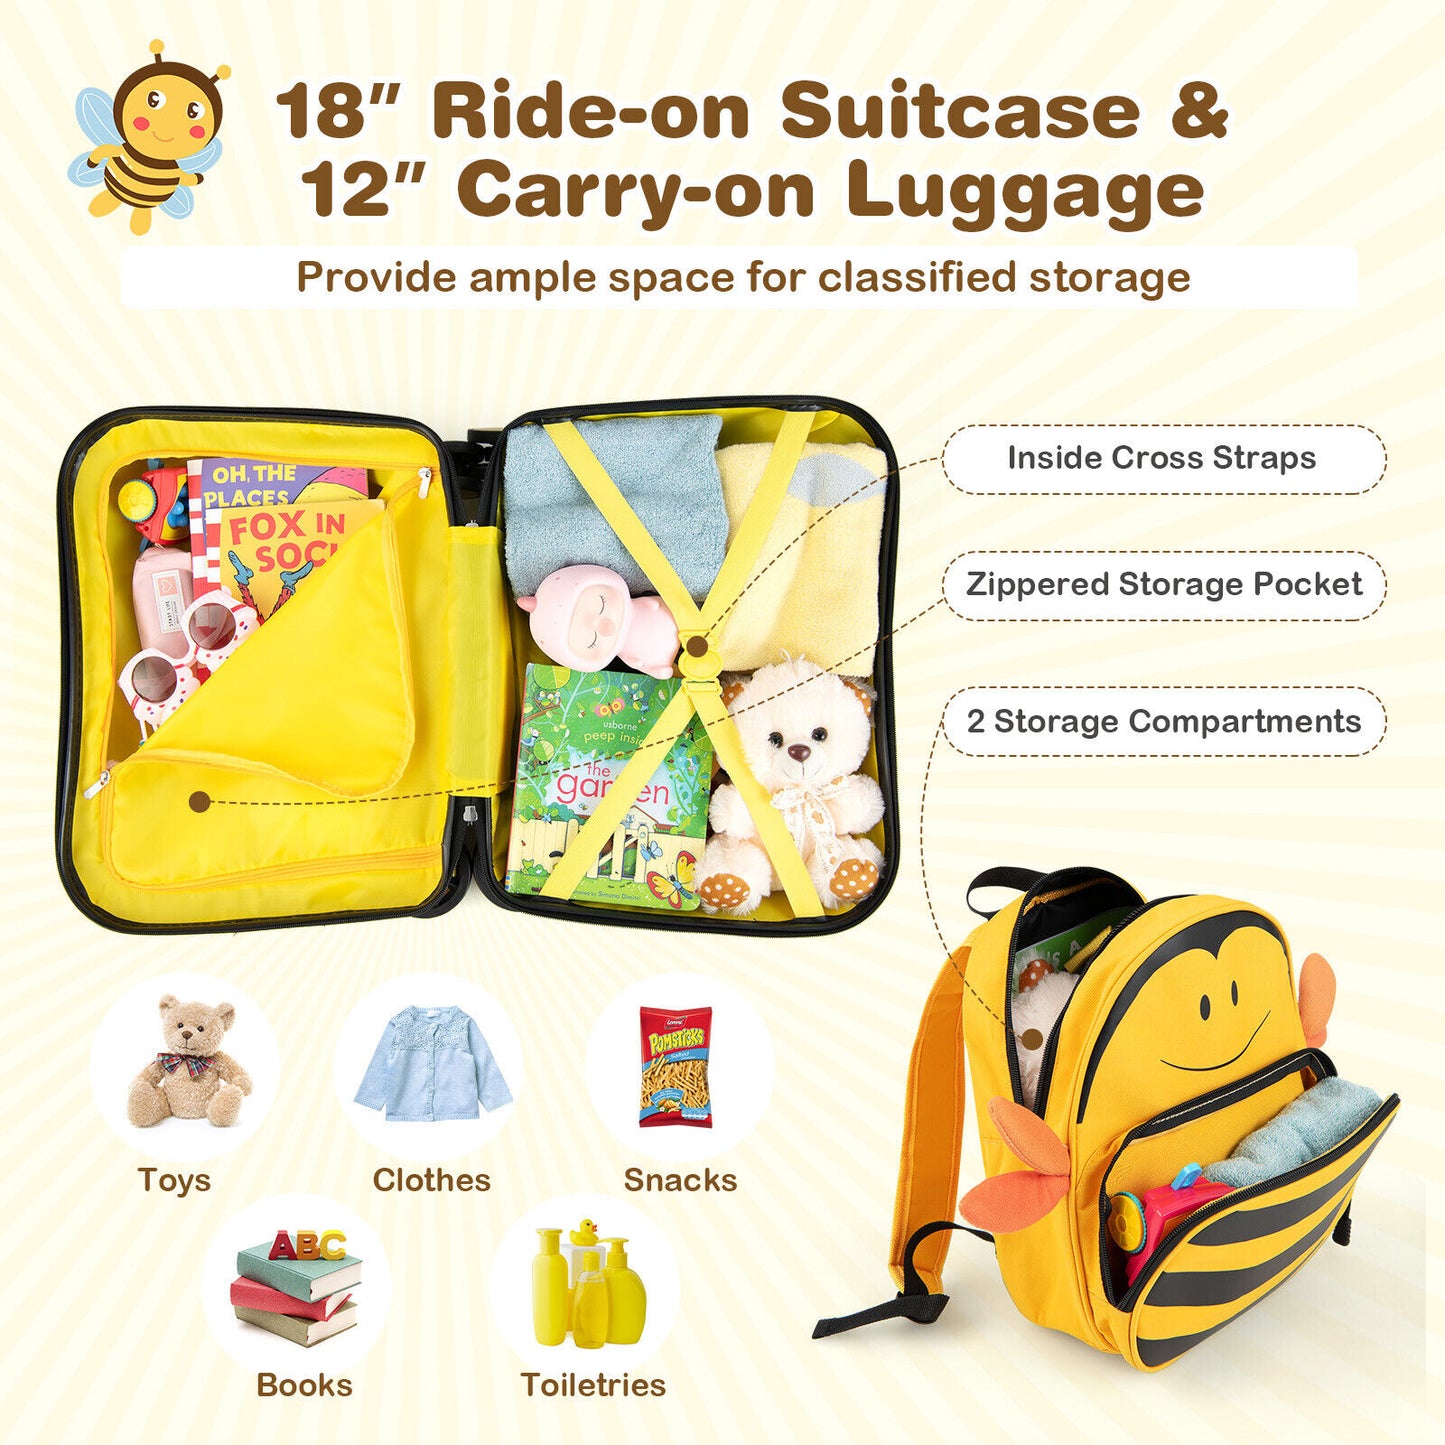 2 Pieces 18 Inch Ride-on Kids Luggage Set with Spinner Wheels and Bee Pattern-Yellow